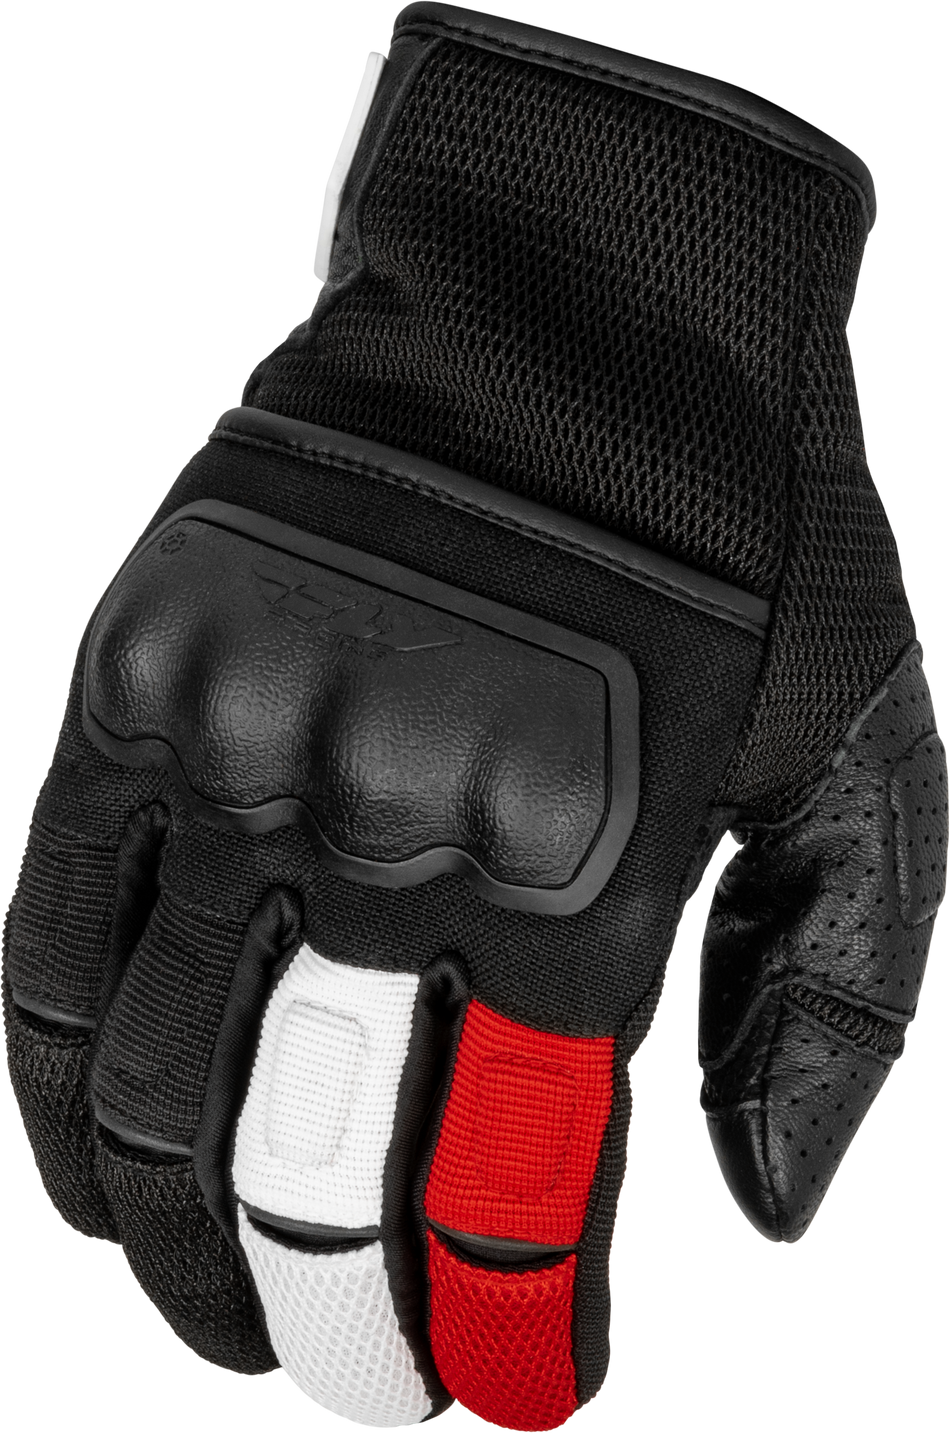 FLY RACING Coolpro Force Gloves Black/White/Red 3x 476-41273X